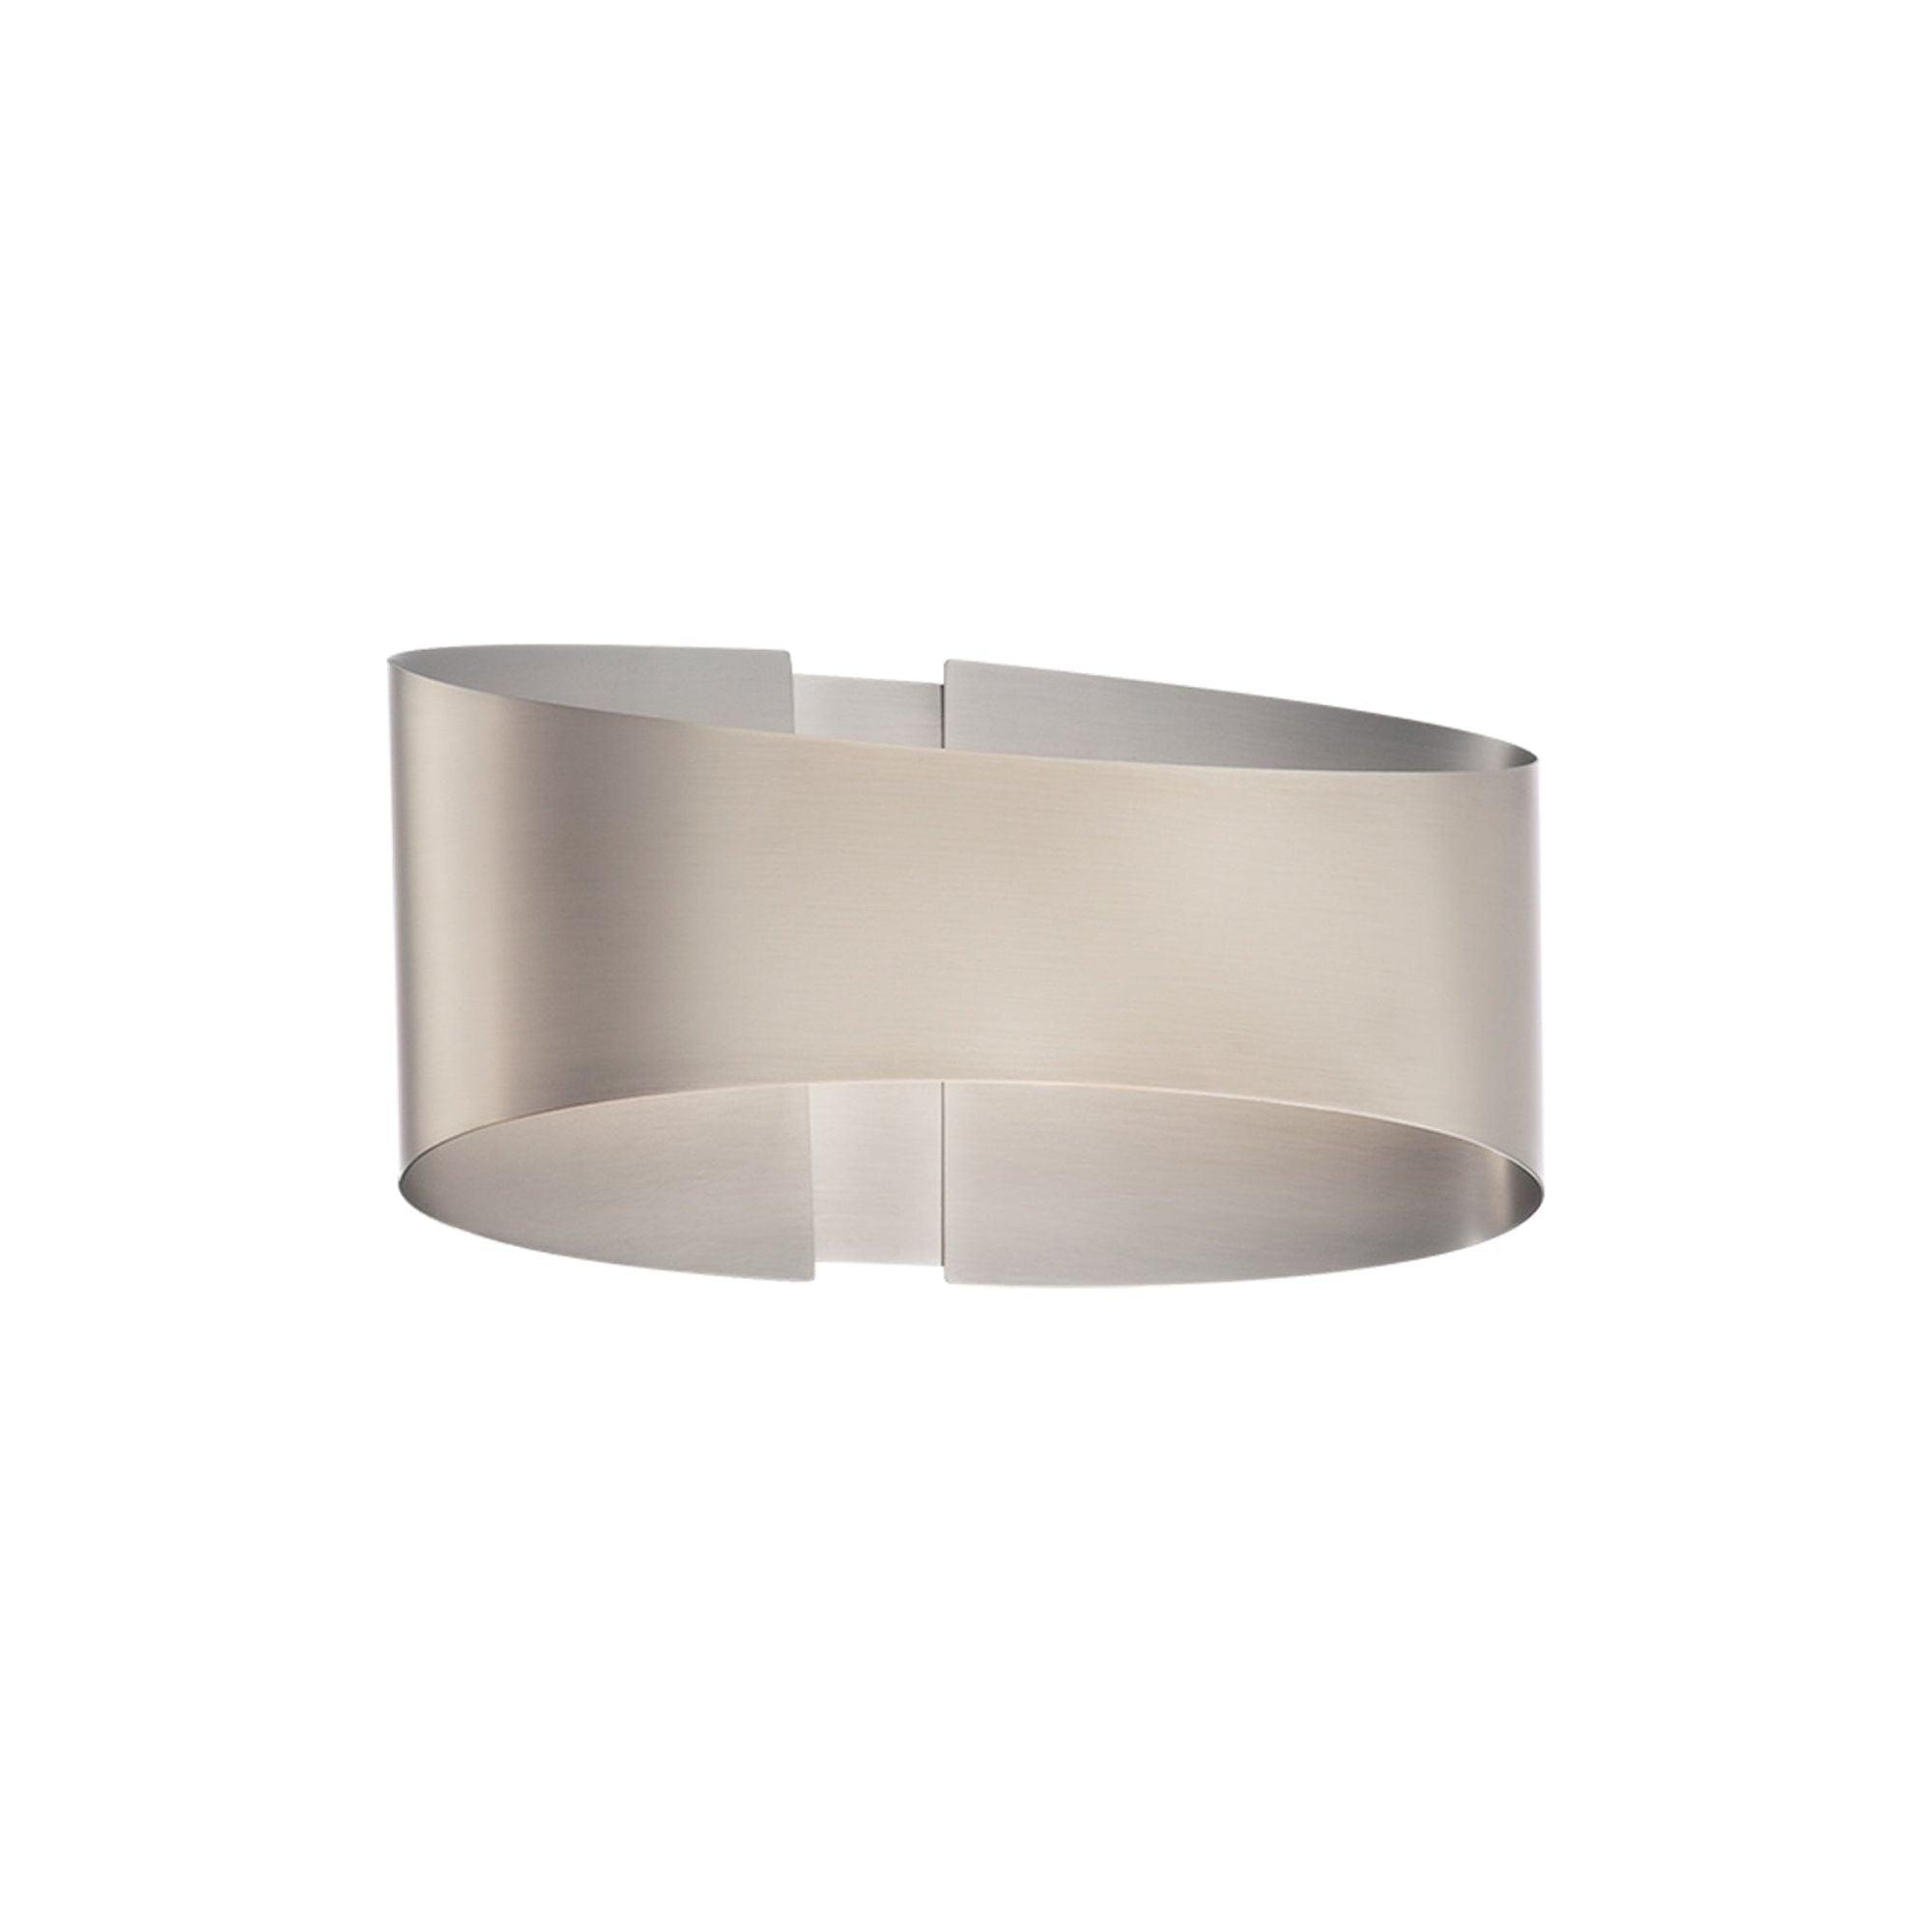 Modern Forms - Swerve 10" LED Wall Sconce - Lights Canada